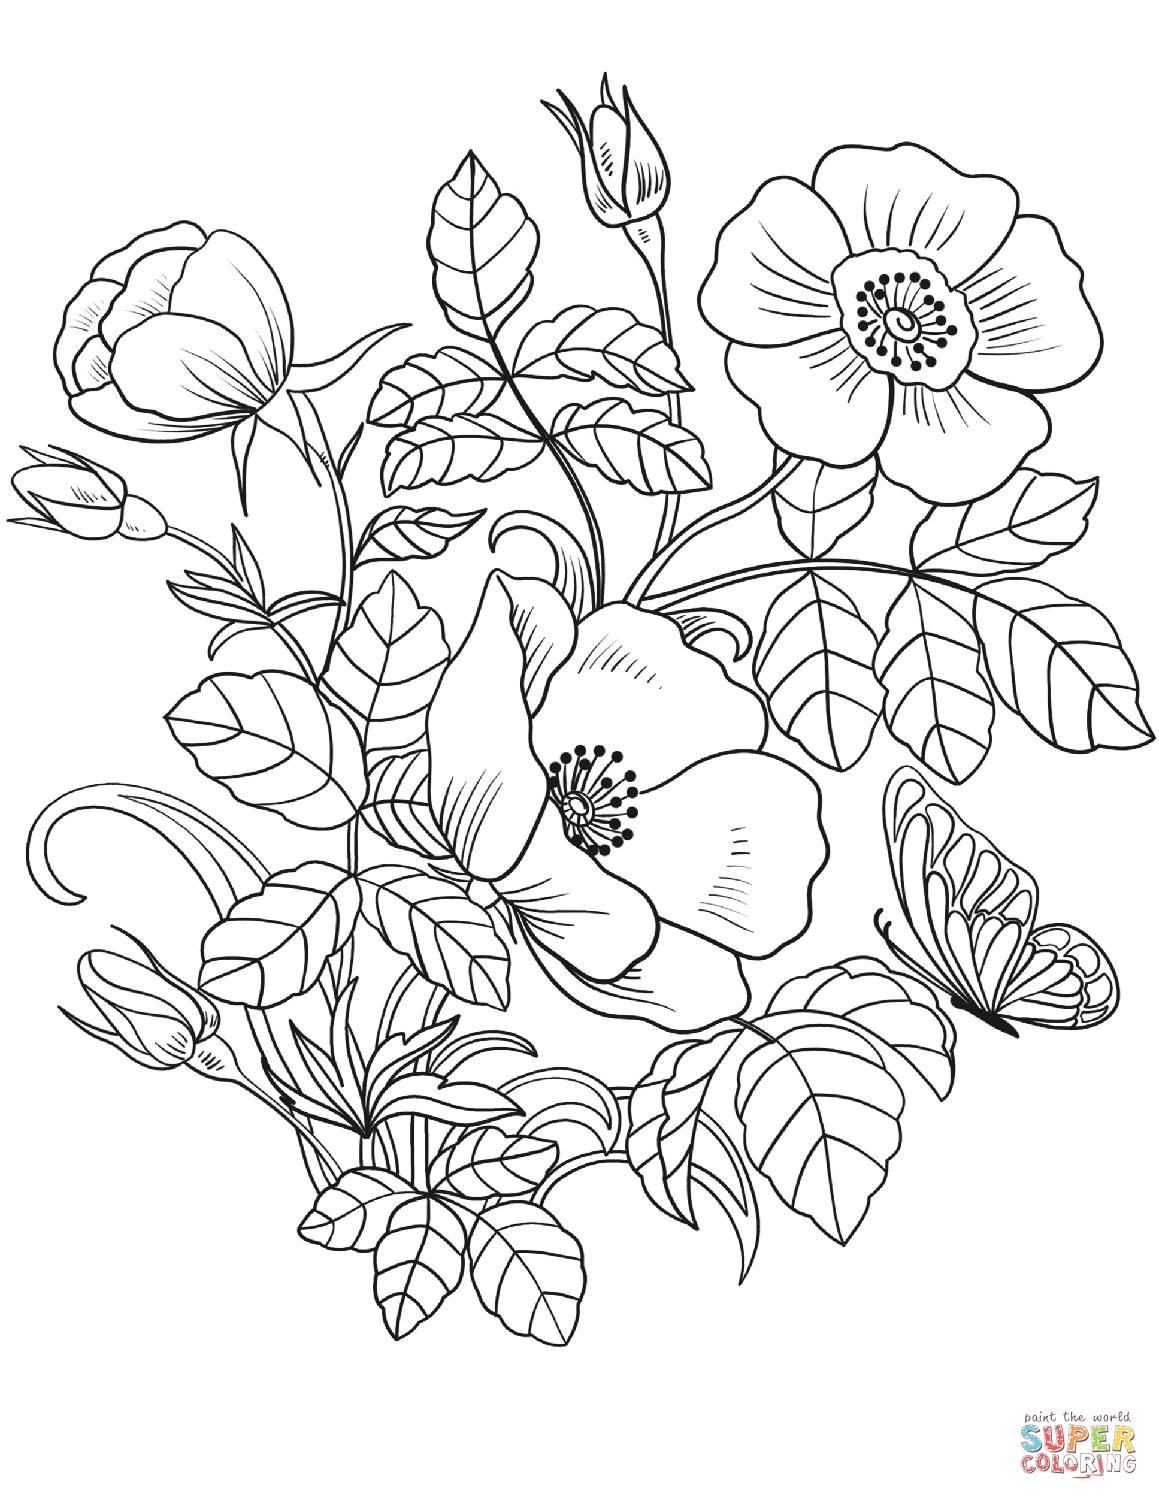 Flower Vine Coloring Pages at GetColorings.com | Free printable